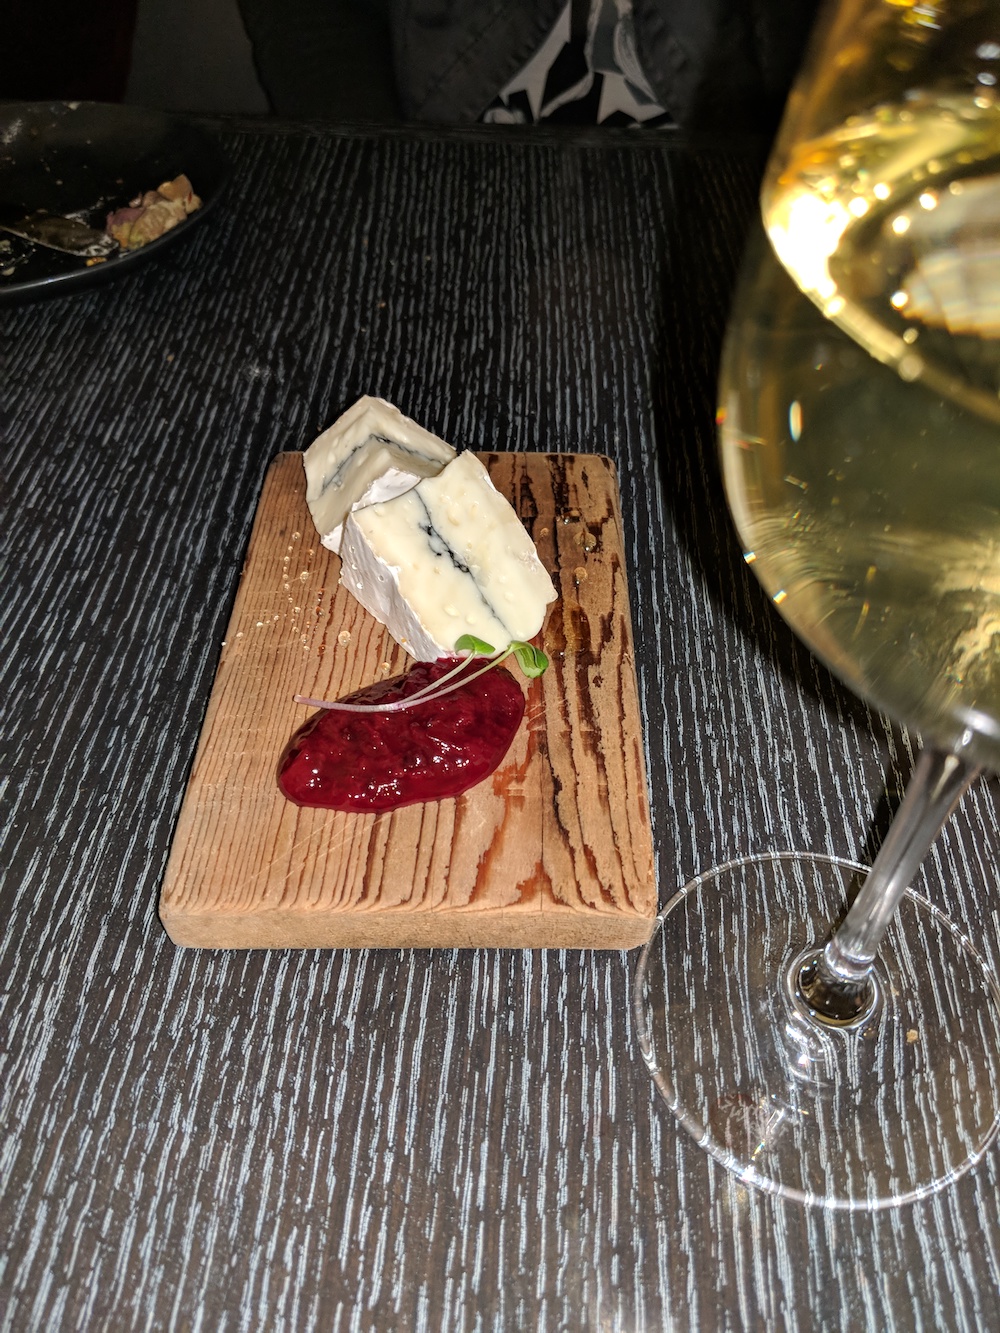 A Little Brie and Chardonnay